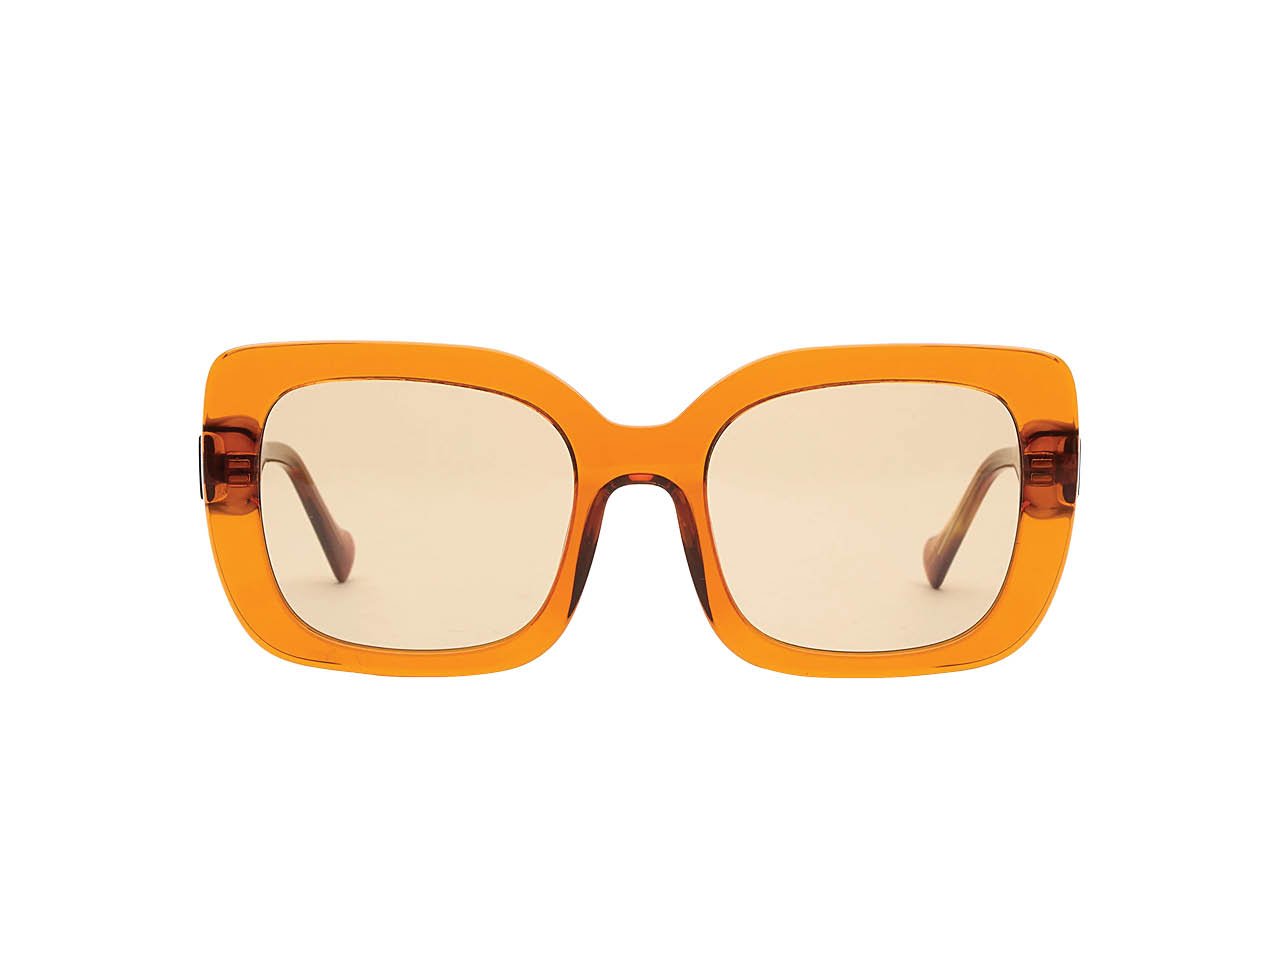 Kits' orange oversided acetate sunglasses are perfect for summer.